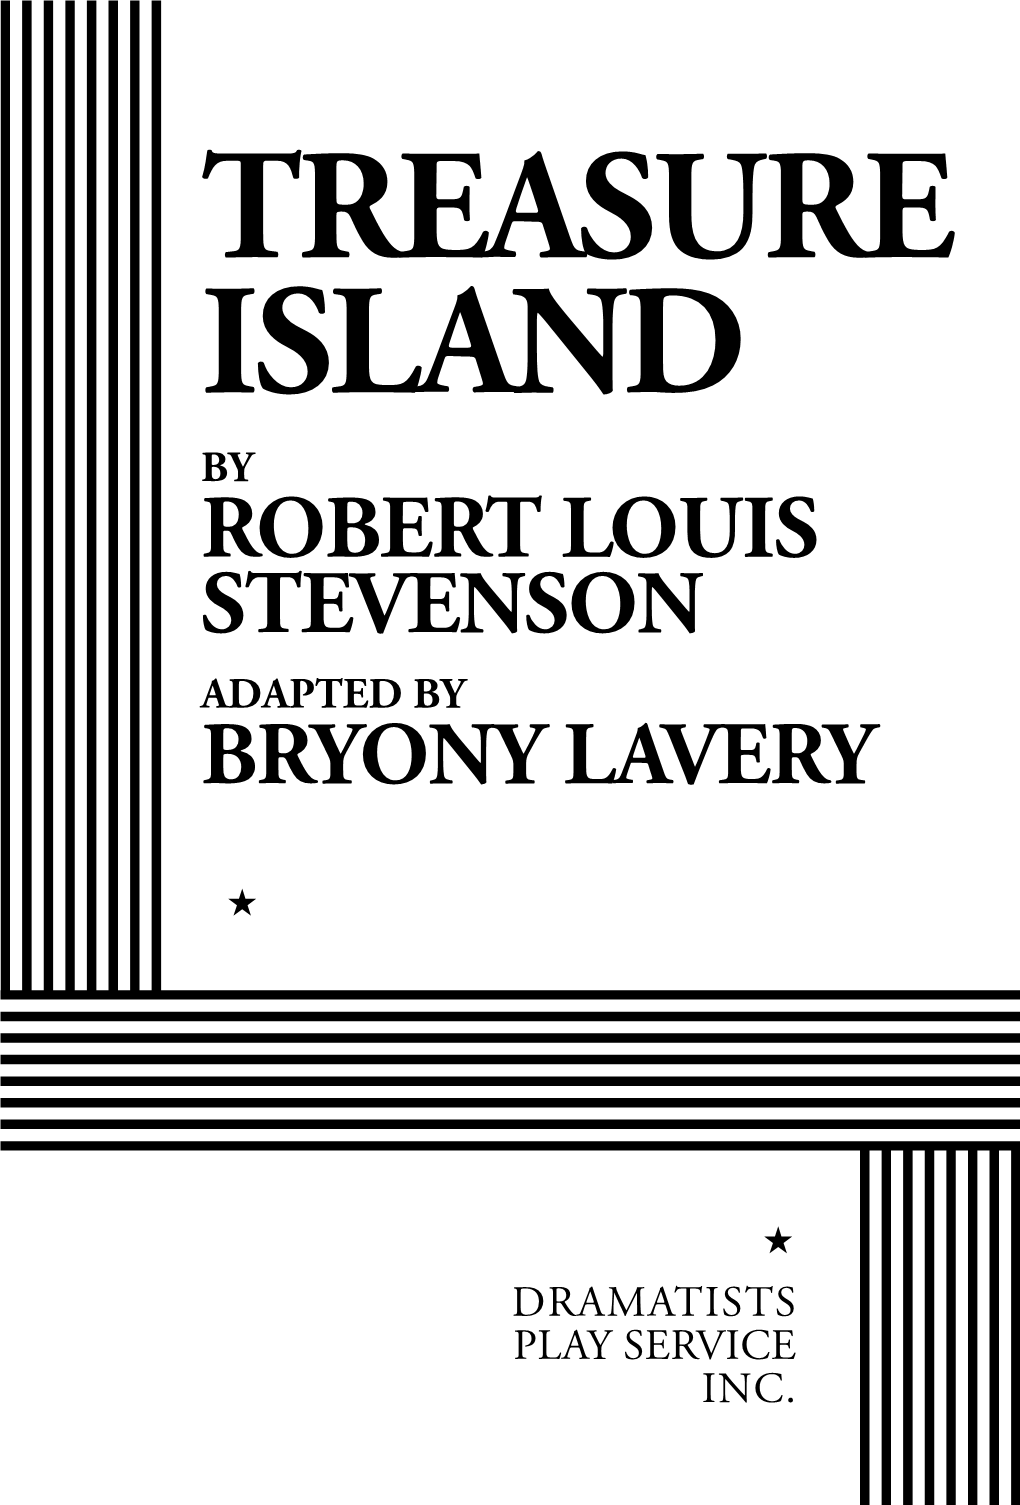 Treasure Island by Robert Louis Stevenson Adapted by Bryony Lavery